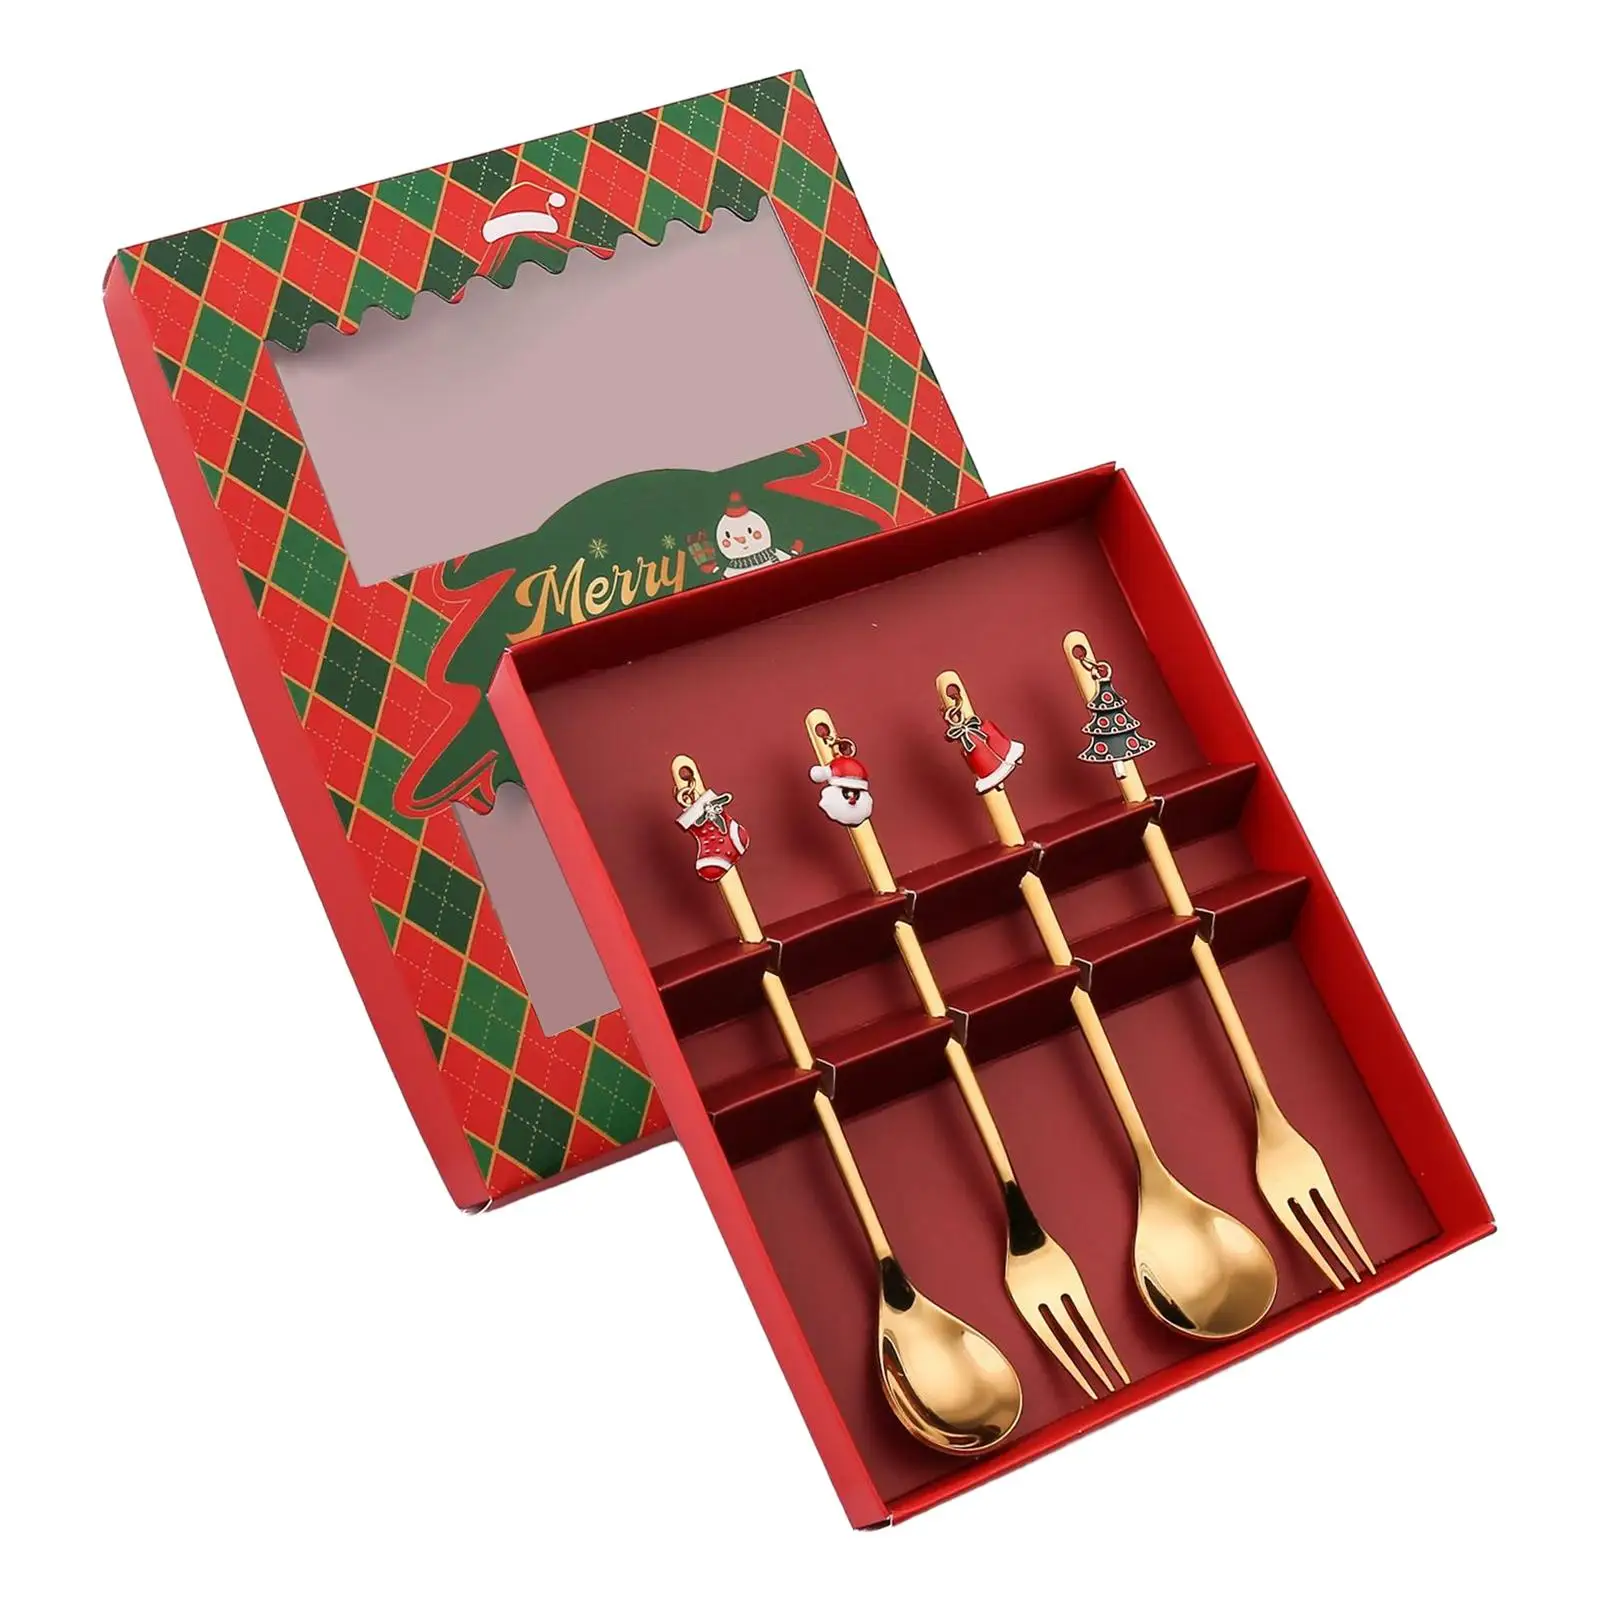 Xmas Cutlery Kits Stainless Steel Spoon Fork for Kitchen Holiday Restaurant